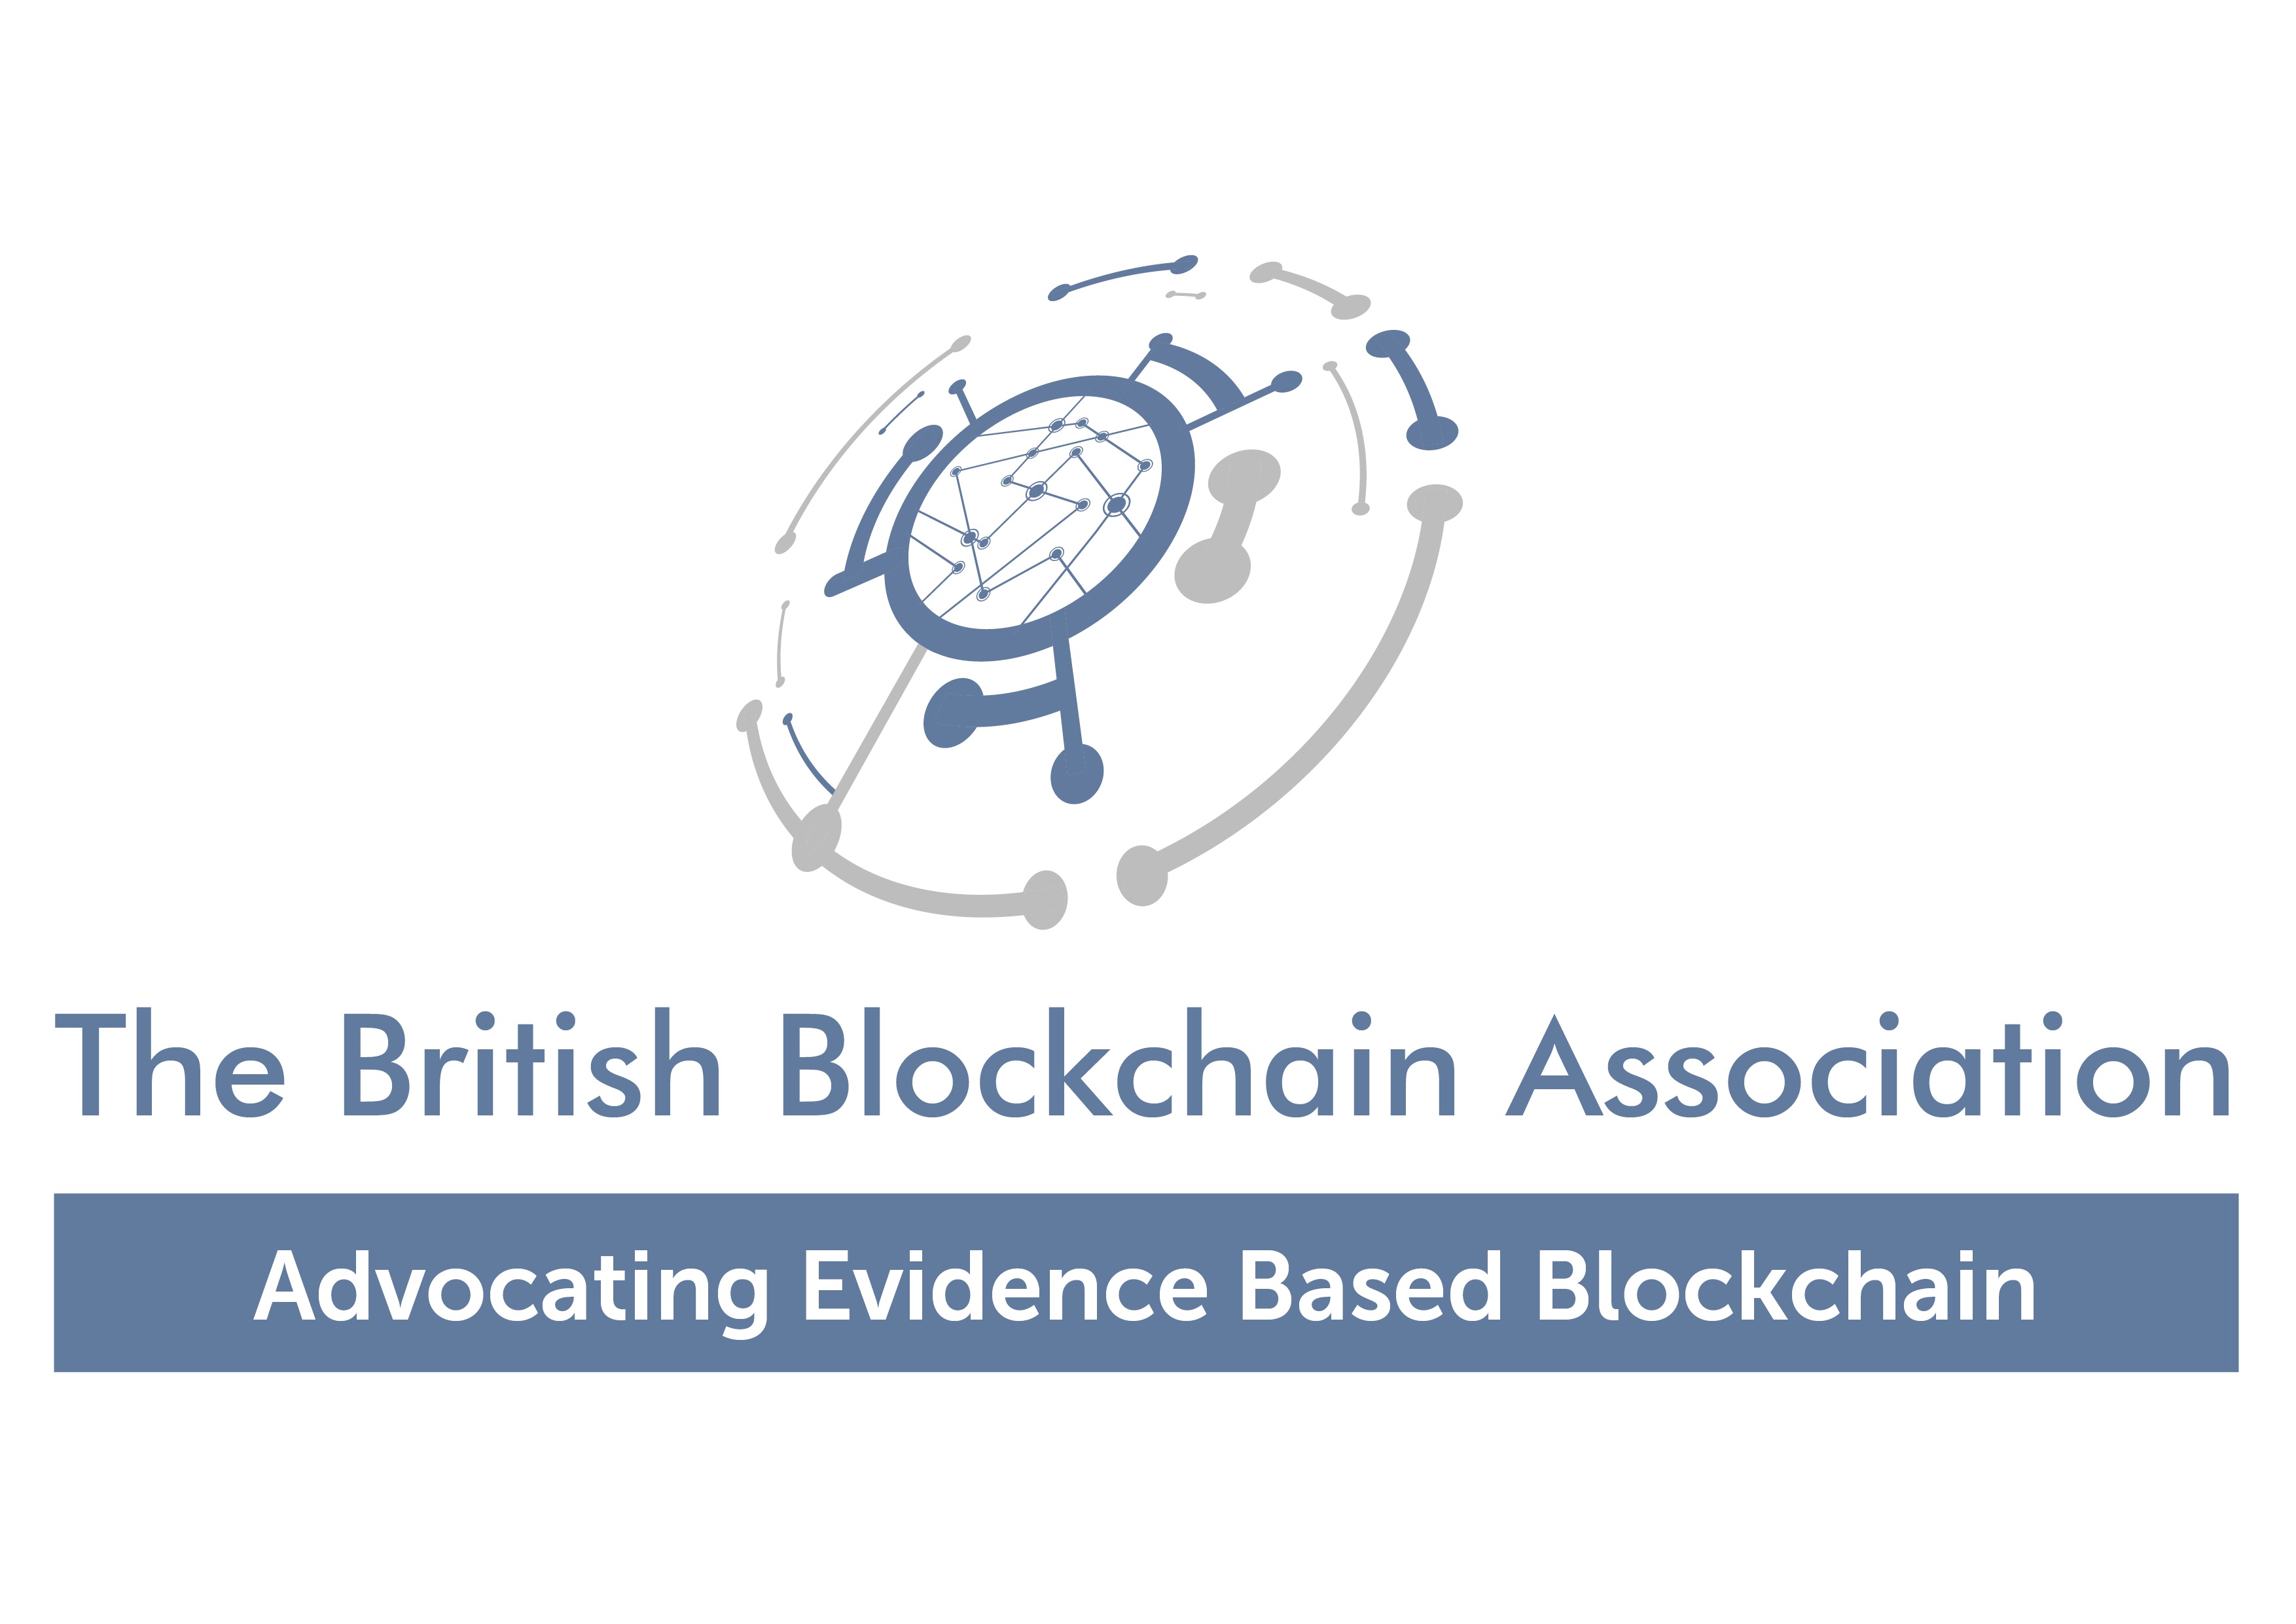 #BlockchainResearch: Editage Announces Partnership with British Blockchain Association to Expand Support Services to Journal Authors